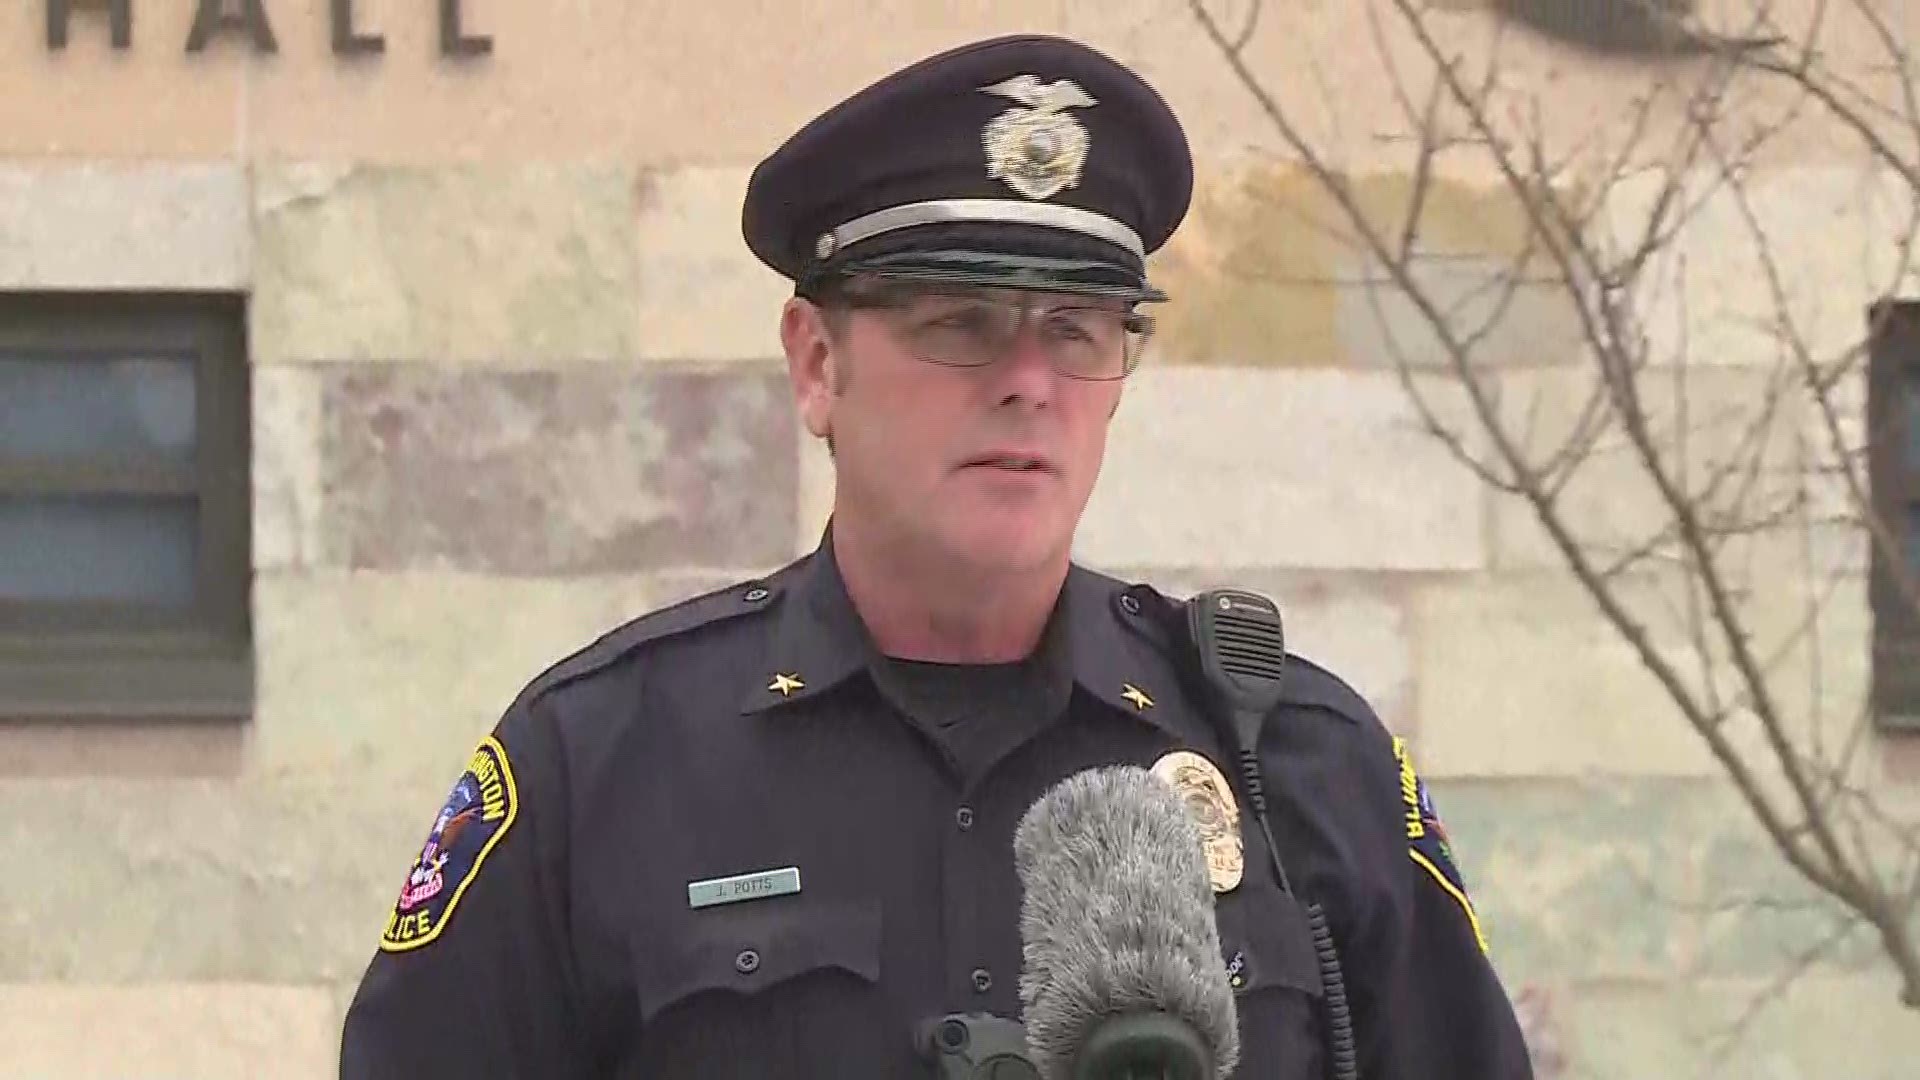 Bloomington Police Chief Jeff Potts held a press conference Saturday at noon stating the 5-year-old child "is still alive."